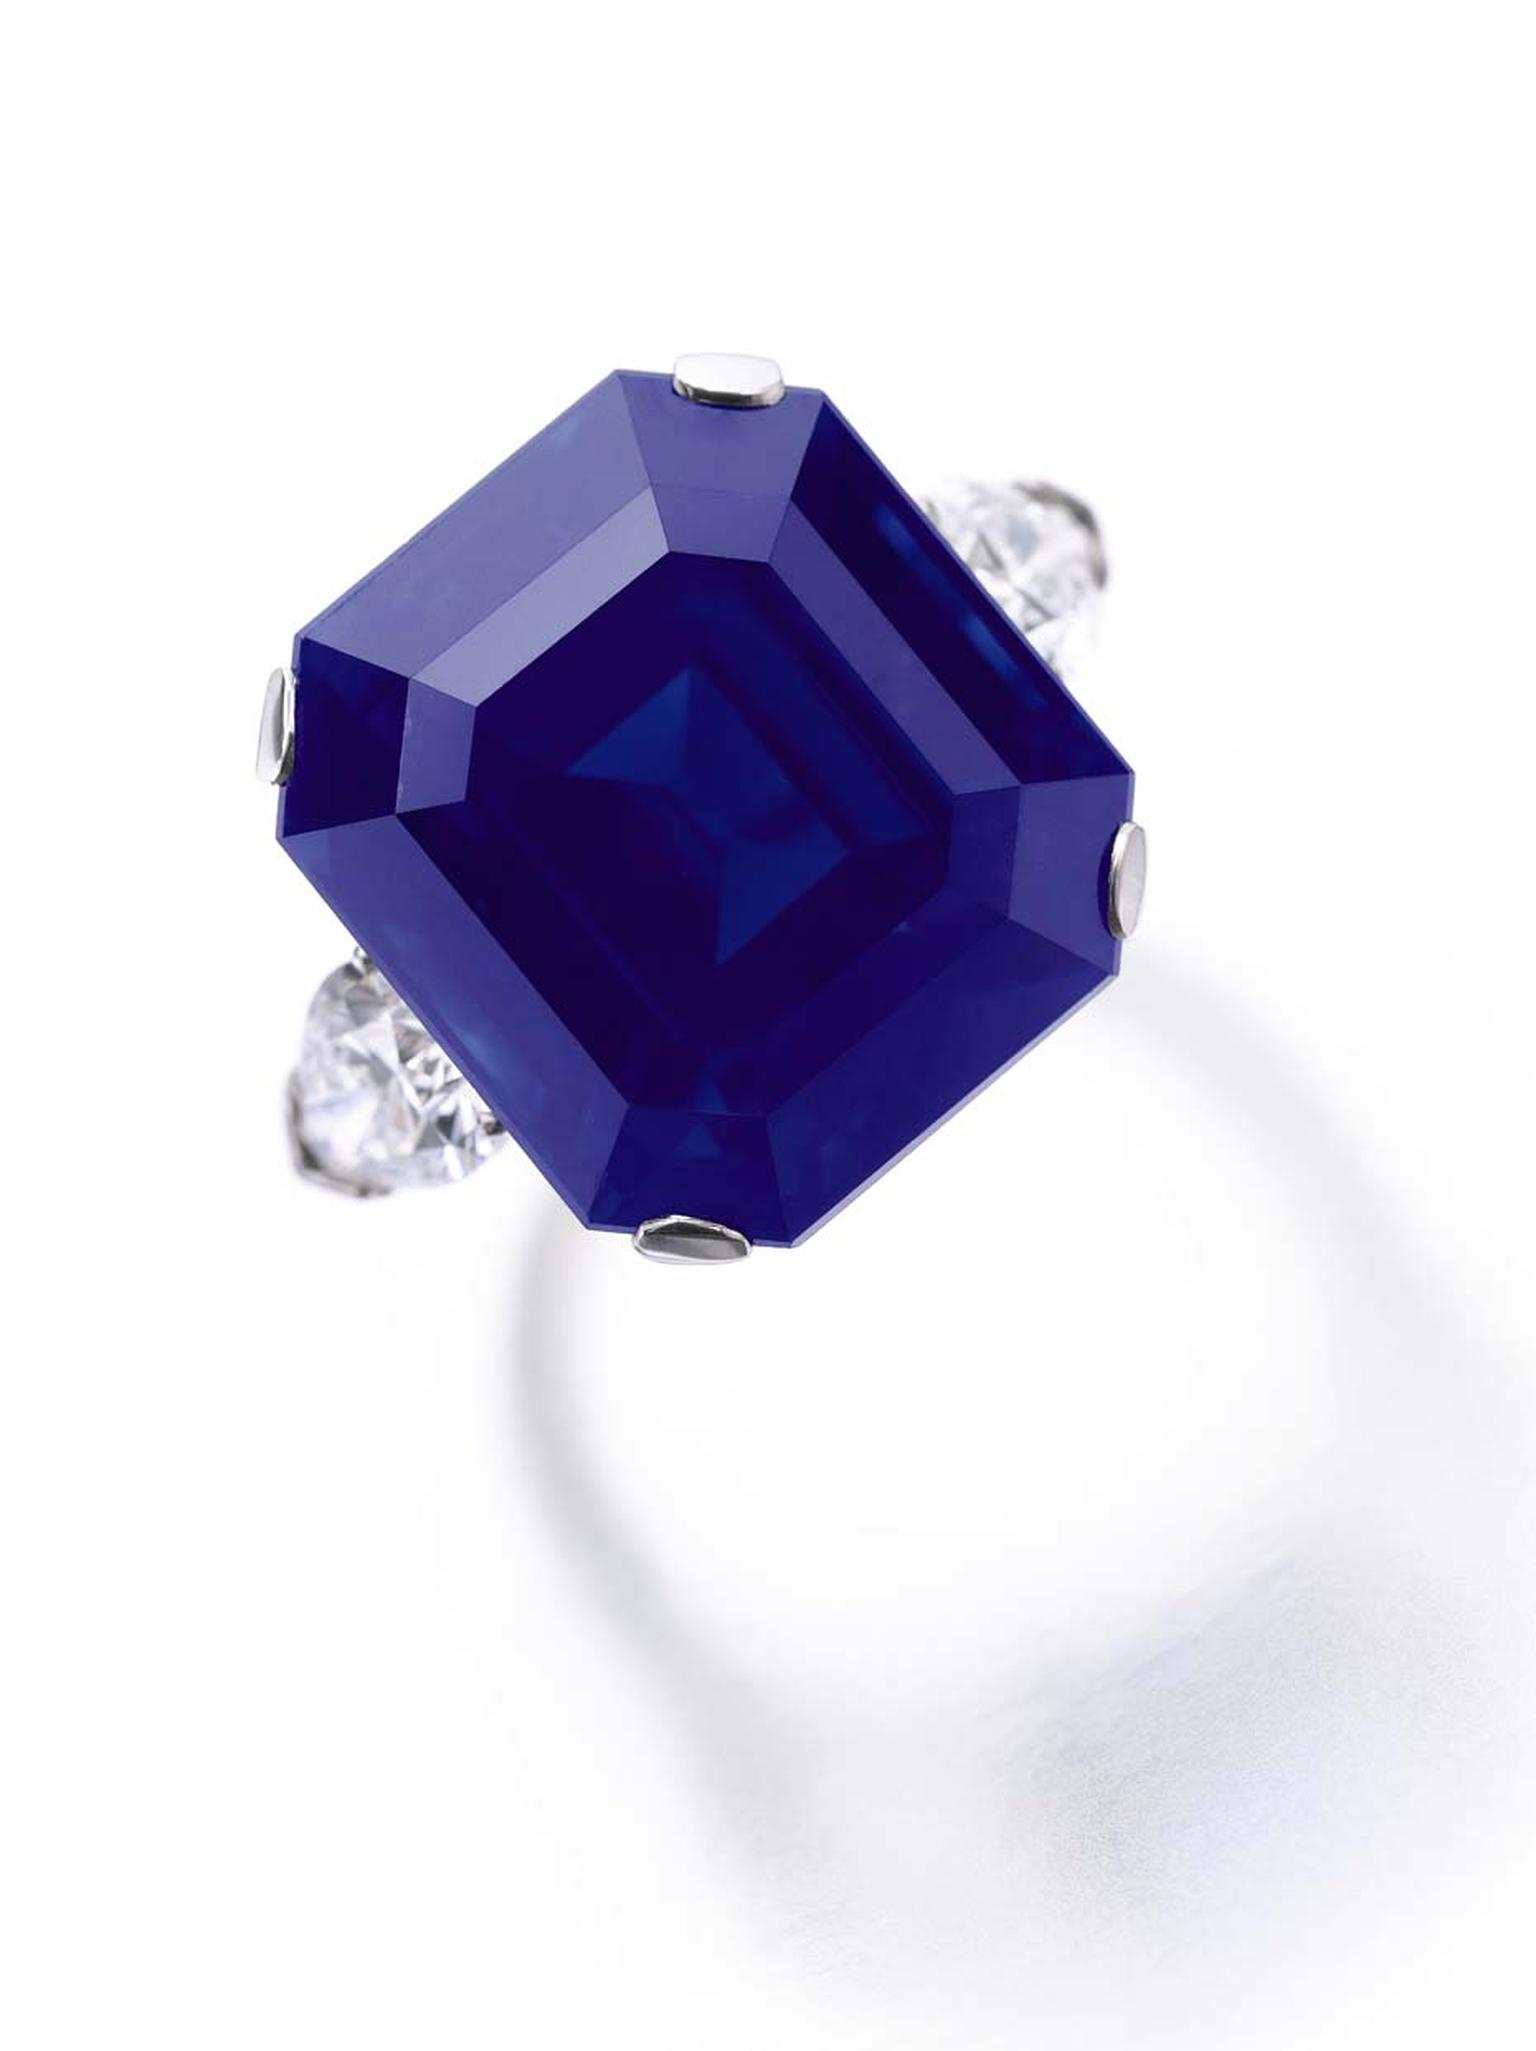 The 27.54ct sapphire from Kashmir in this ring belonging to Greek financier Dimitri Mavrommatis combines a deep velvety blue colour with a very high purity. It will go on sale at Sotheby's Geneva this November (estimate: US$3-6 million).